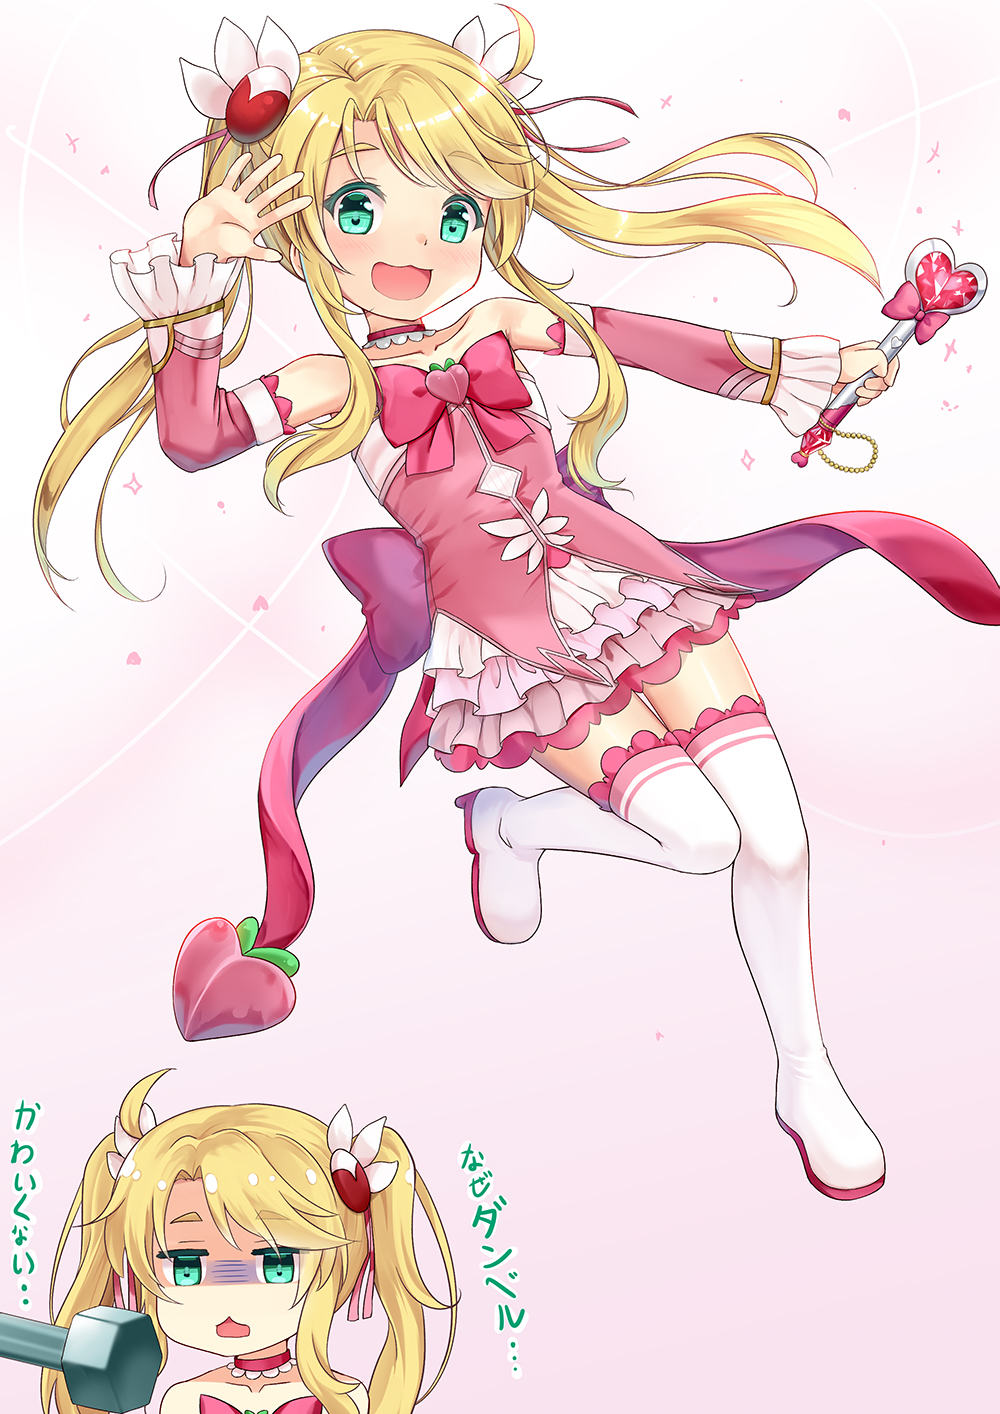 1girl :3 :d bangs blonde_hair blush boots bow chiyoda_momo chiyoda_momo_(cosplay) collarbone commentary_request cosplay detached_sleeves eyebrows_visible_through_hair food fruit green_eyes hair_ornament hand_up heart highres himesaka_noa holding layered_skirt long_sleeves looking_at_viewer machikado_mazoku magical_girl multiple_views niiya open_mouth peach pink_shirt pink_skirt pink_sleeves pleated_skirt red_bow shirt skirt smile standing standing_on_one_leg strapless thigh-highs thigh_boots translation_request turn_pale twintails watashi_ni_tenshi_ga_maiorita! white_footwear white_legwear wide_sleeves